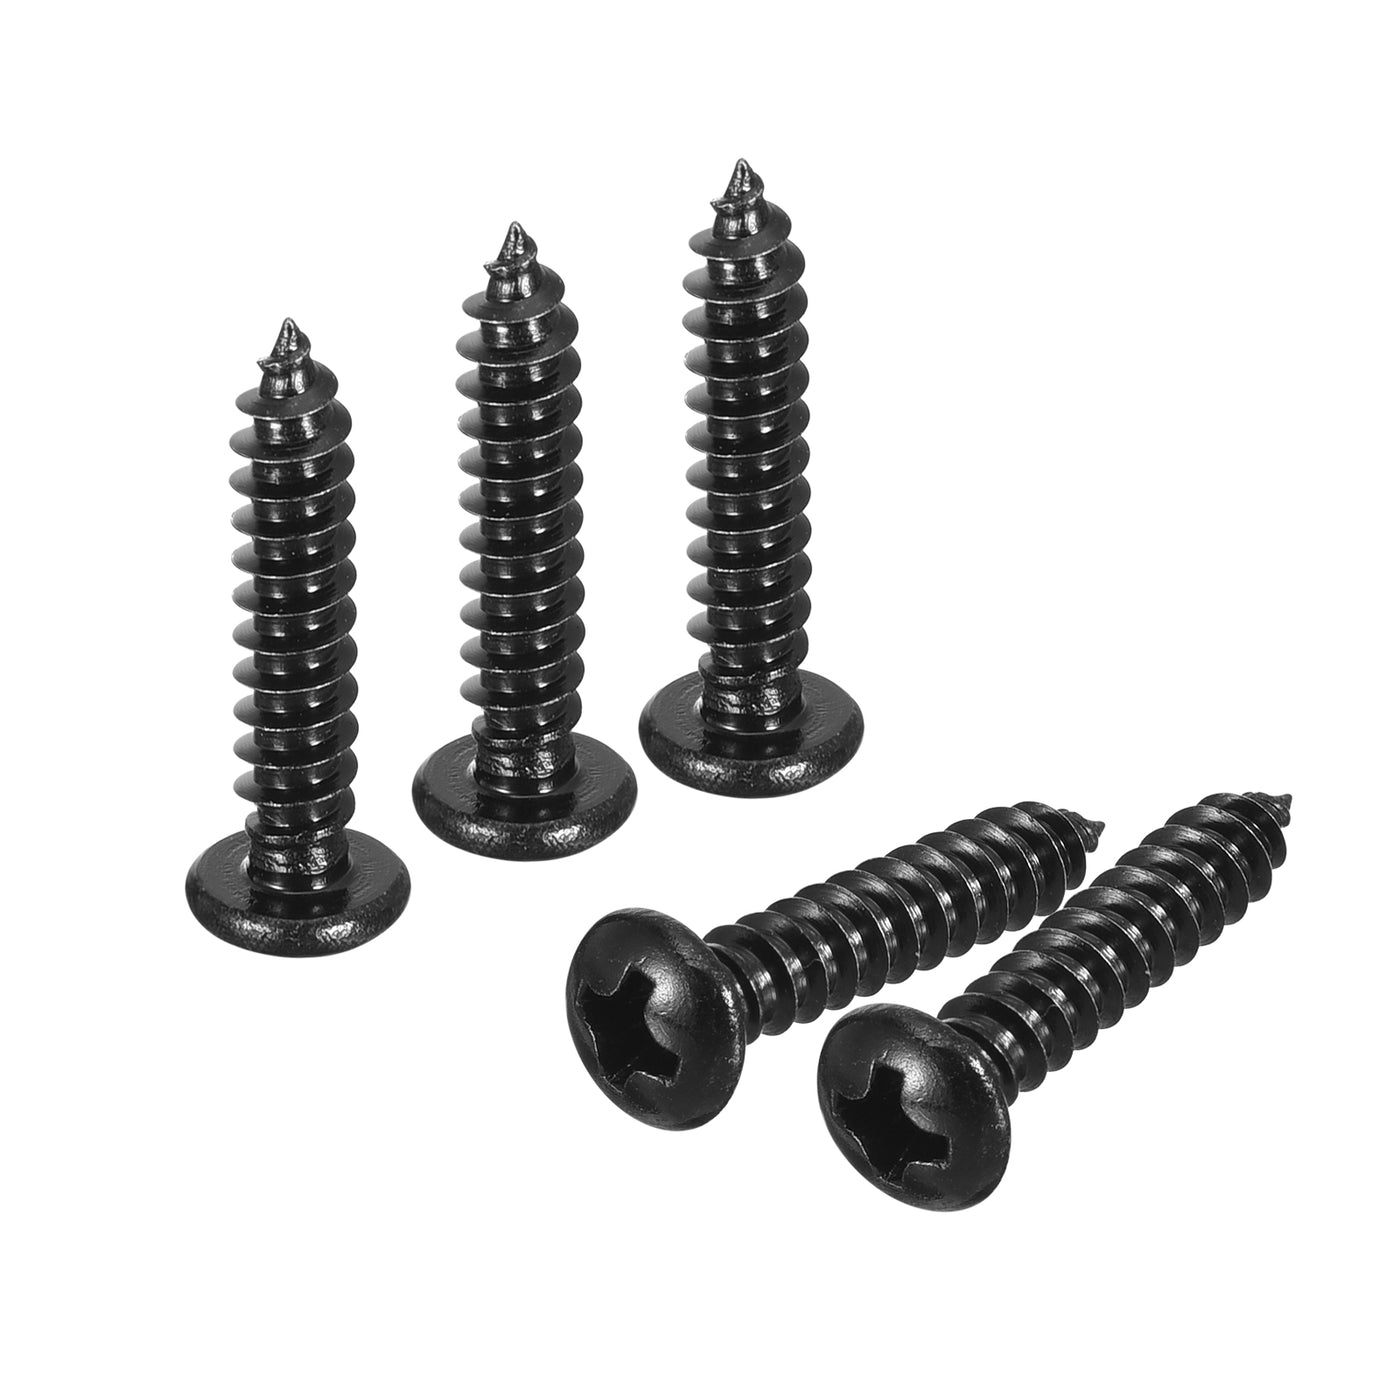 uxcell Uxcell #8 x 3/4" Phillips Pan Head Self-tapping Screw, 100pcs - 304 Stainless Steel Round Head Wood Screw Full Thread (Black)